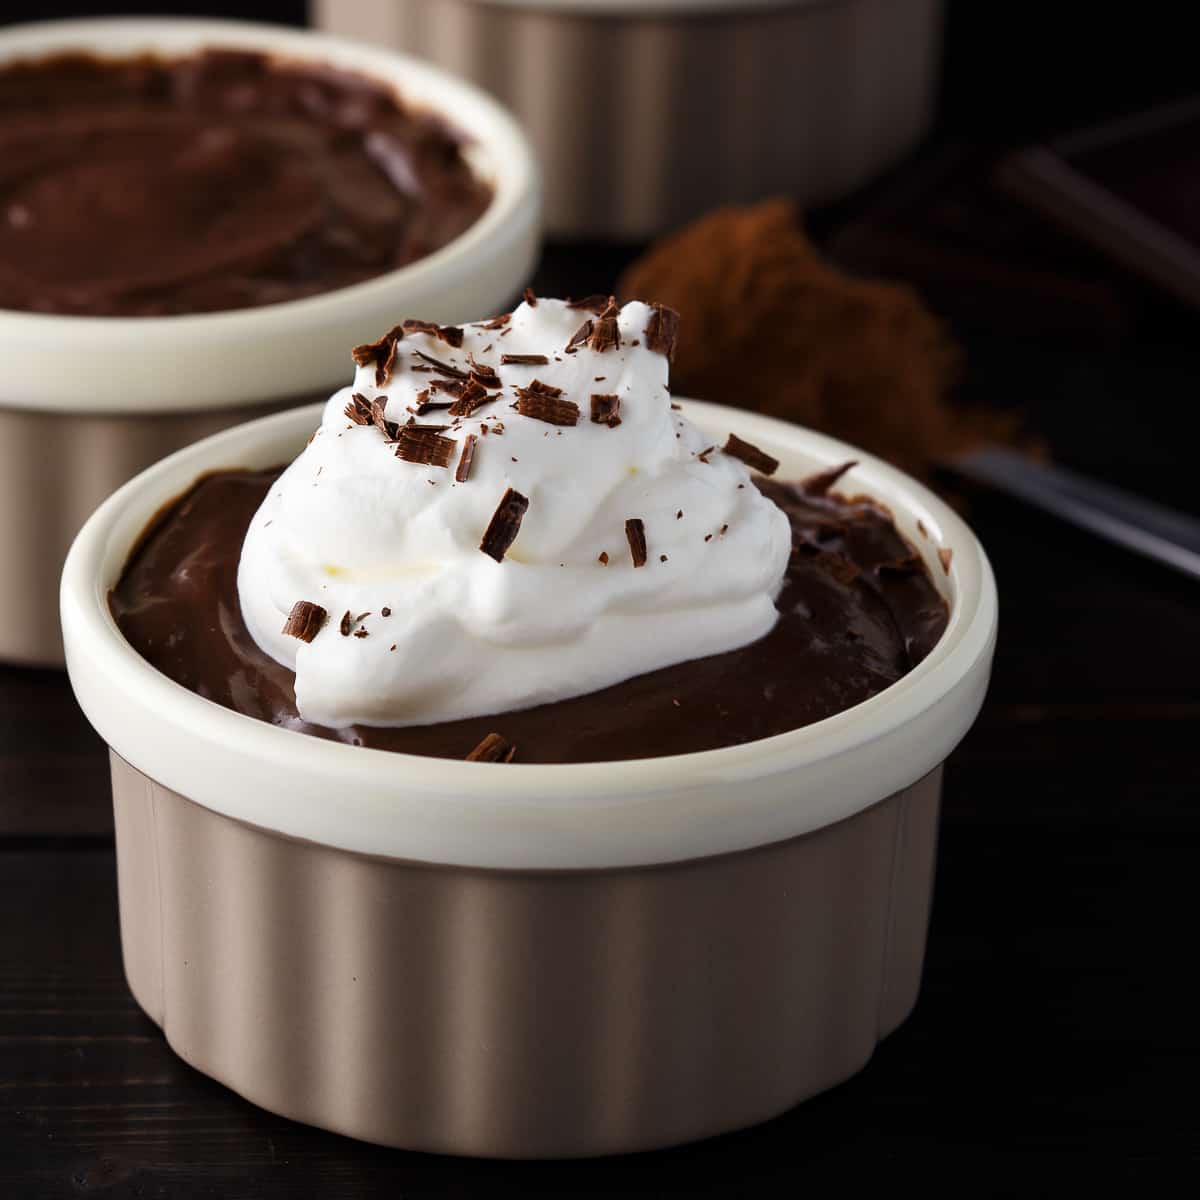 Side view of chocolate pudding with whipped cream on top in a tan ramekin.